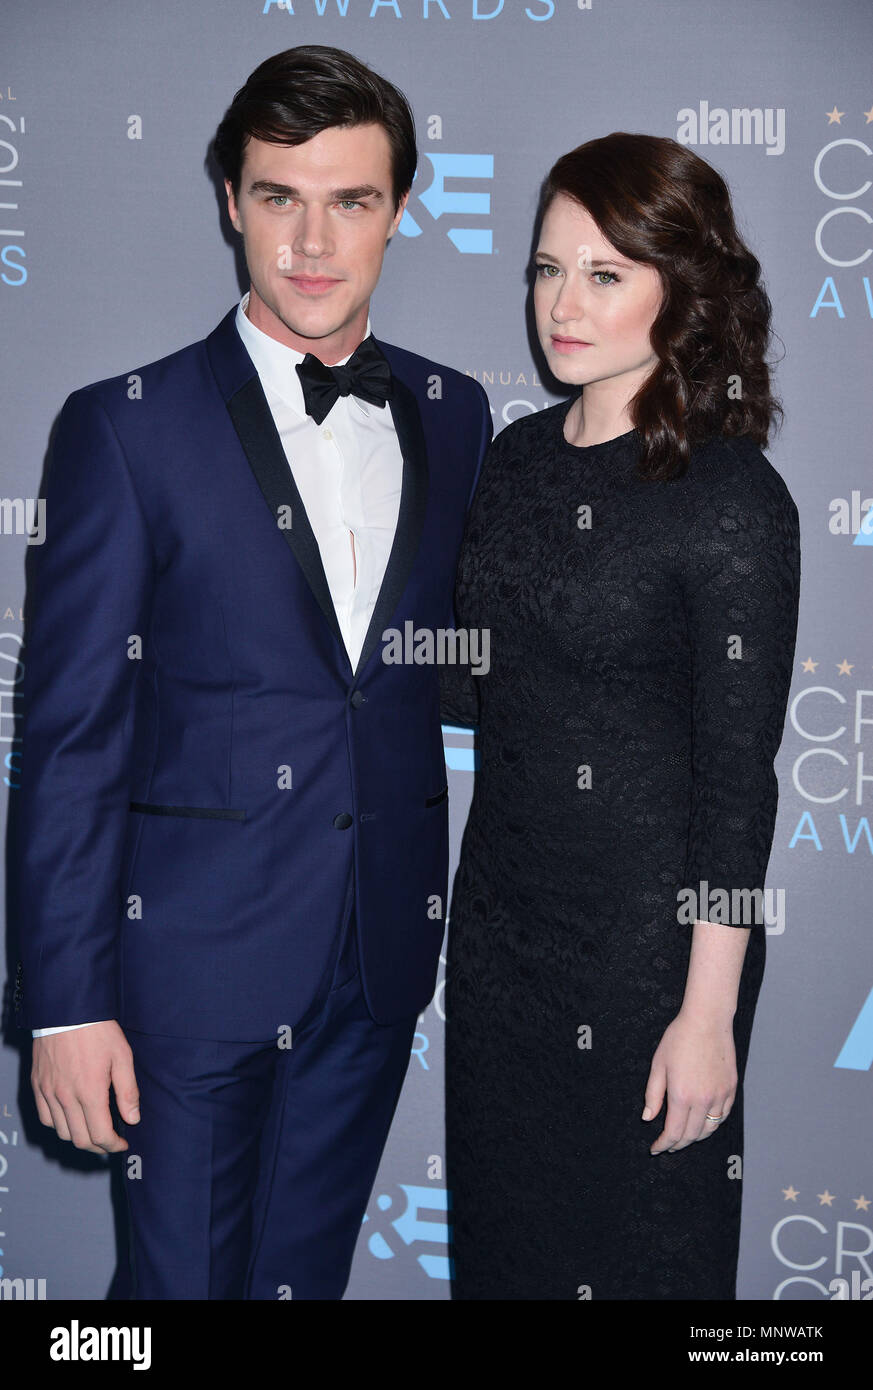 Finn Wittrock, Sarah Roberts   at the 21th Ann. Critics Choice Awards 2016 at the Barker Hangar in Santa Monica. January 17, 2016.Finn Wittrock, Sarah Roberts  ------------- Red Carpet Event, Vertical, USA, Film Industry, Celebrities,  Photography, Bestof, Arts Culture and Entertainment, Topix Celebrities fashion /  Vertical, Best of, Event in Hollywood Life - California,  Red Carpet and backstage, USA, Film Industry, Celebrities,  movie celebrities, TV celebrities, Music celebrities, Photography, Bestof, Arts Culture and Entertainment,  Topix, vertical,  family from from the year , 2016, inqu Stock Photo